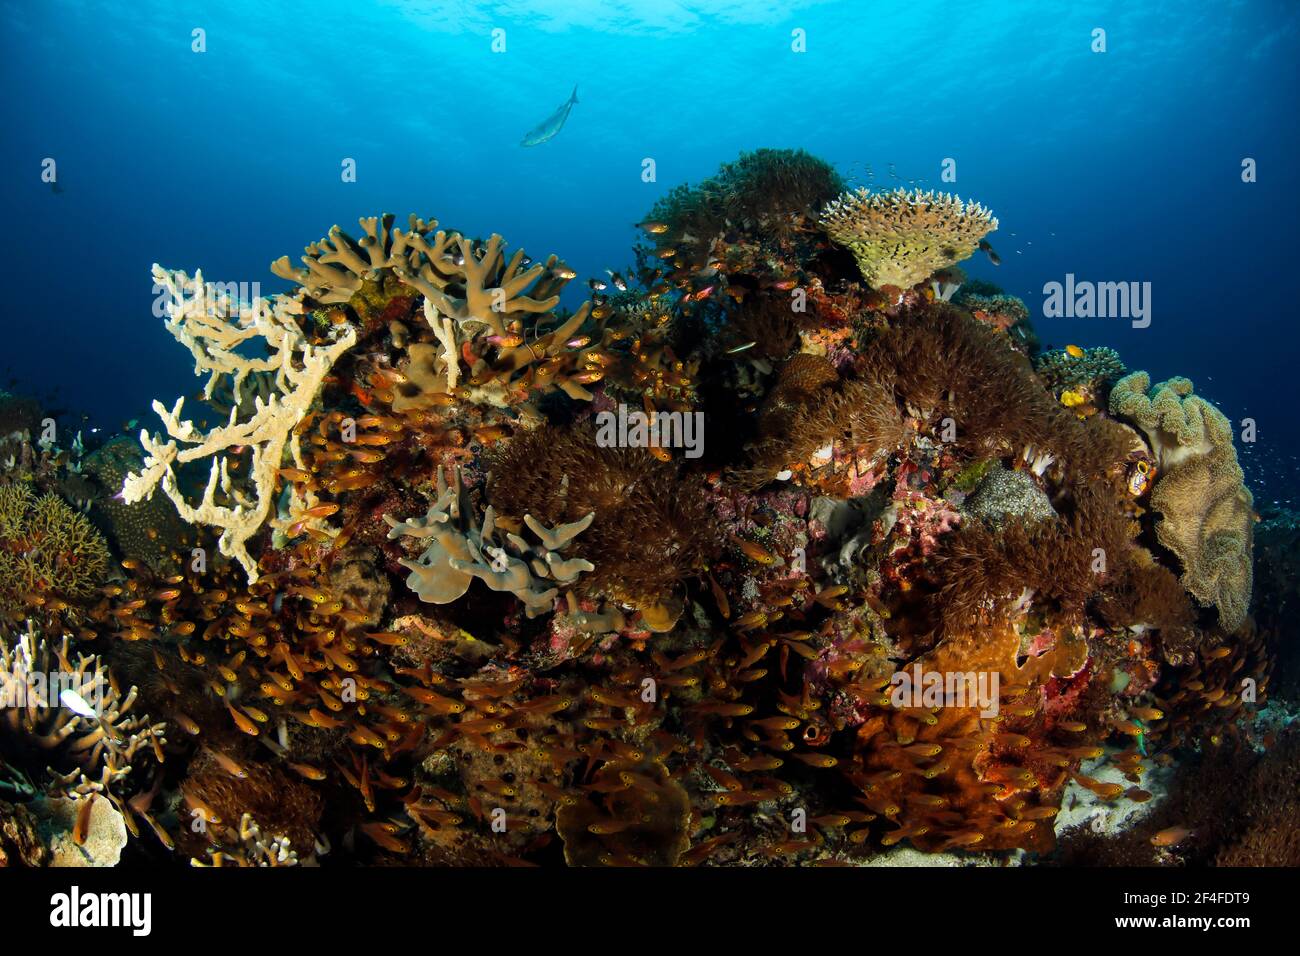 Colorful Coral Reef bursting with Life. Raja Ampat, West Papua, Indonesia Stock Photo